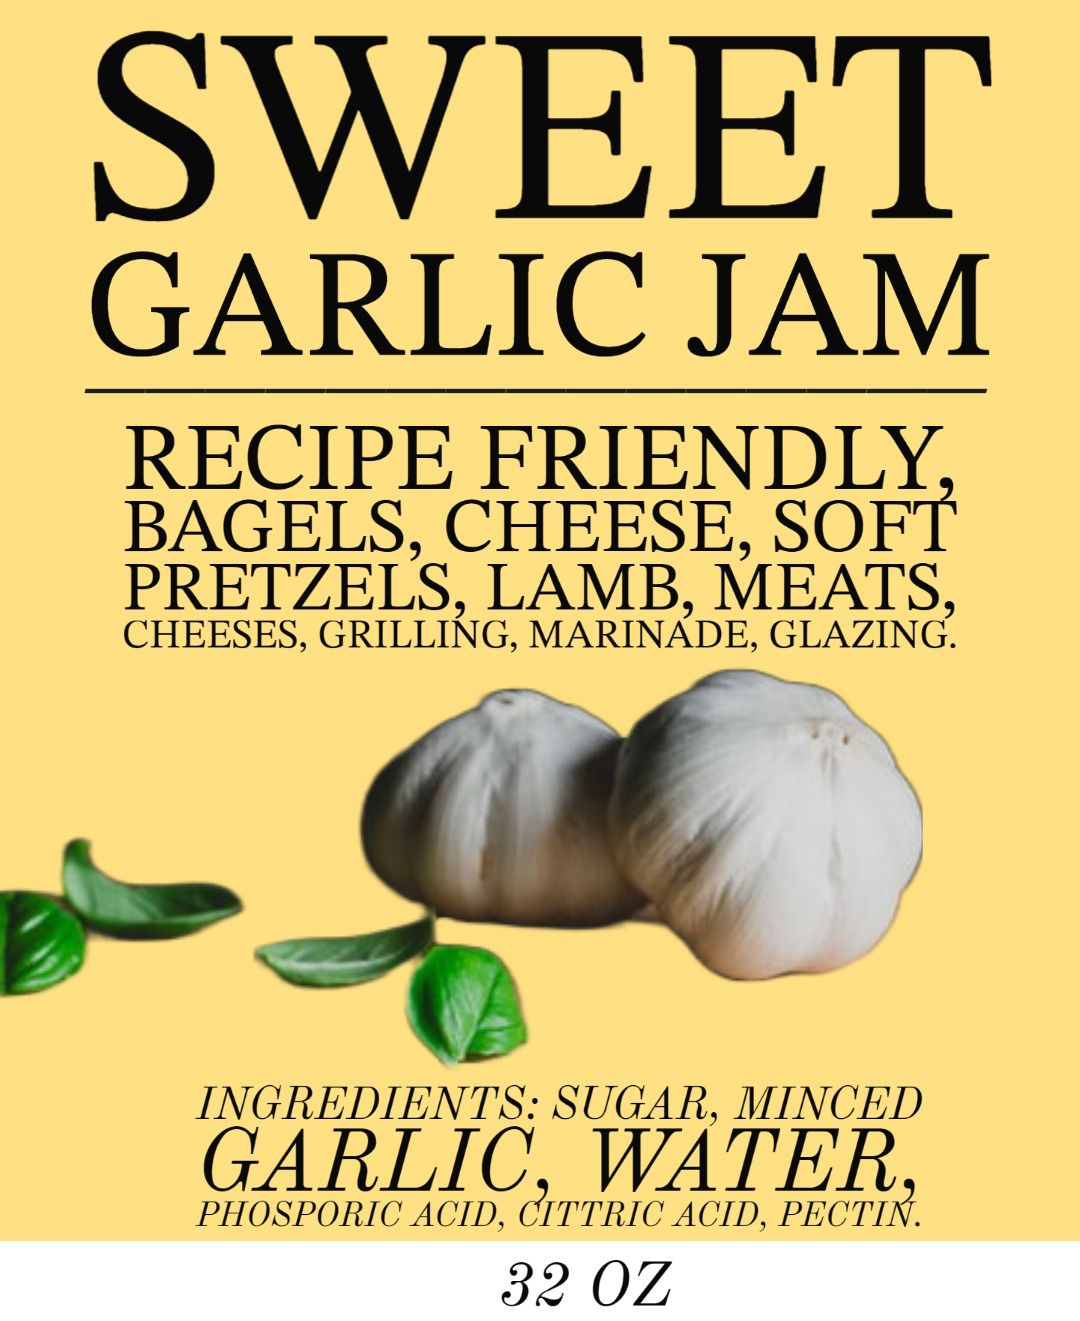 Two large garlic bulbs with leaves on a yellow background with large & small text reference sweet garlic jam in 32oz.